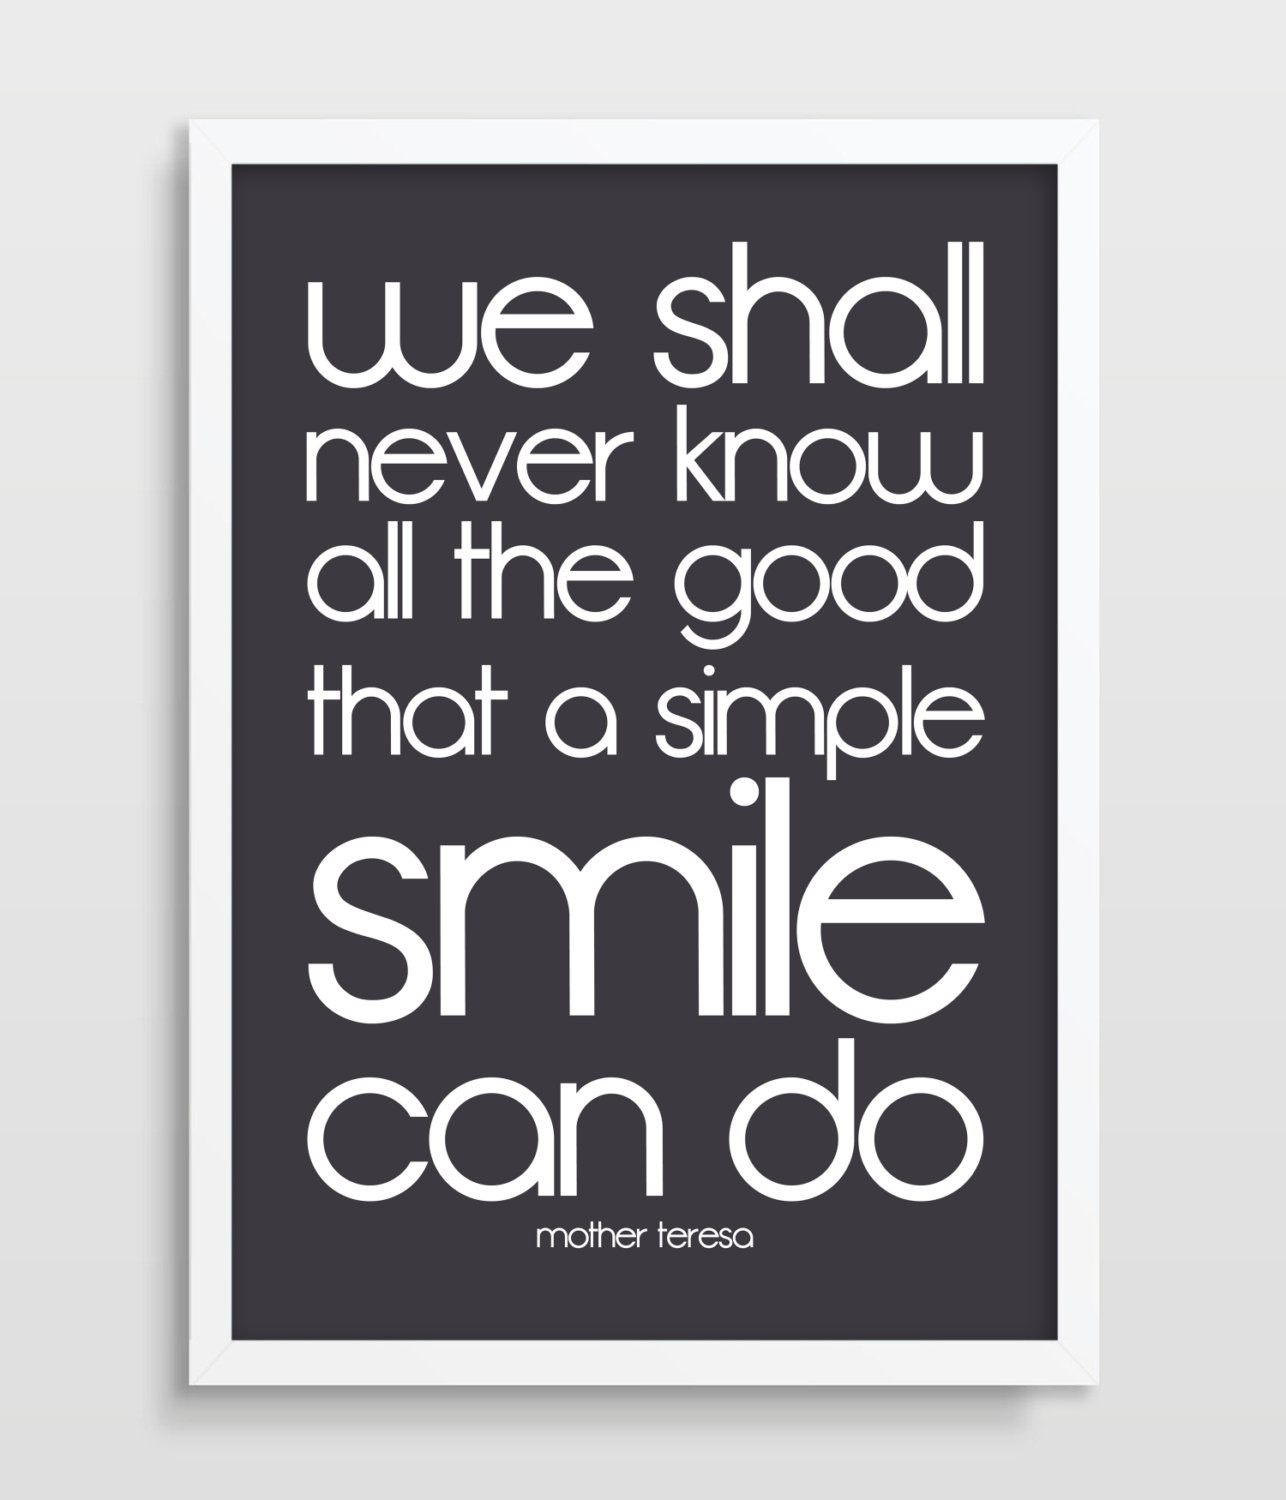 Mother Teresa Quotes Smile
 Mother Teresa Print Happiness Quote Poster Smile